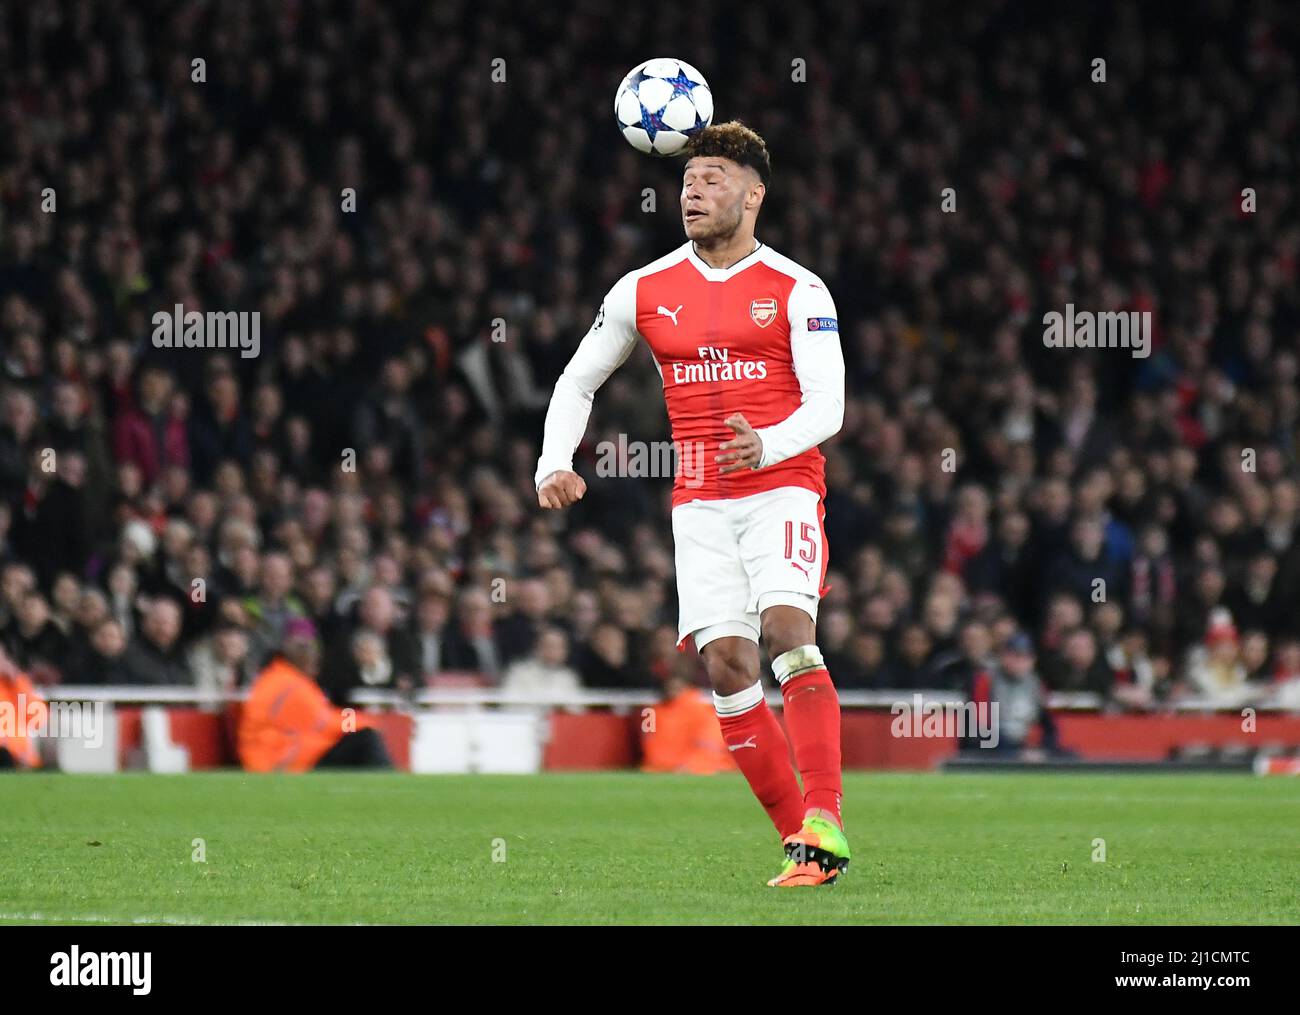 LONDON, ENGLAND - MARCH 7, 2017: Alex Oxlade-Chamberlain of Arsenal pictured in action during the second leg of the UEFA Champions League Round of 16 game between Arsenal FC and Bayern Munchen at Emirates Stadium. Copyright: Cosmin Iftode/Picstaff Stock Photo